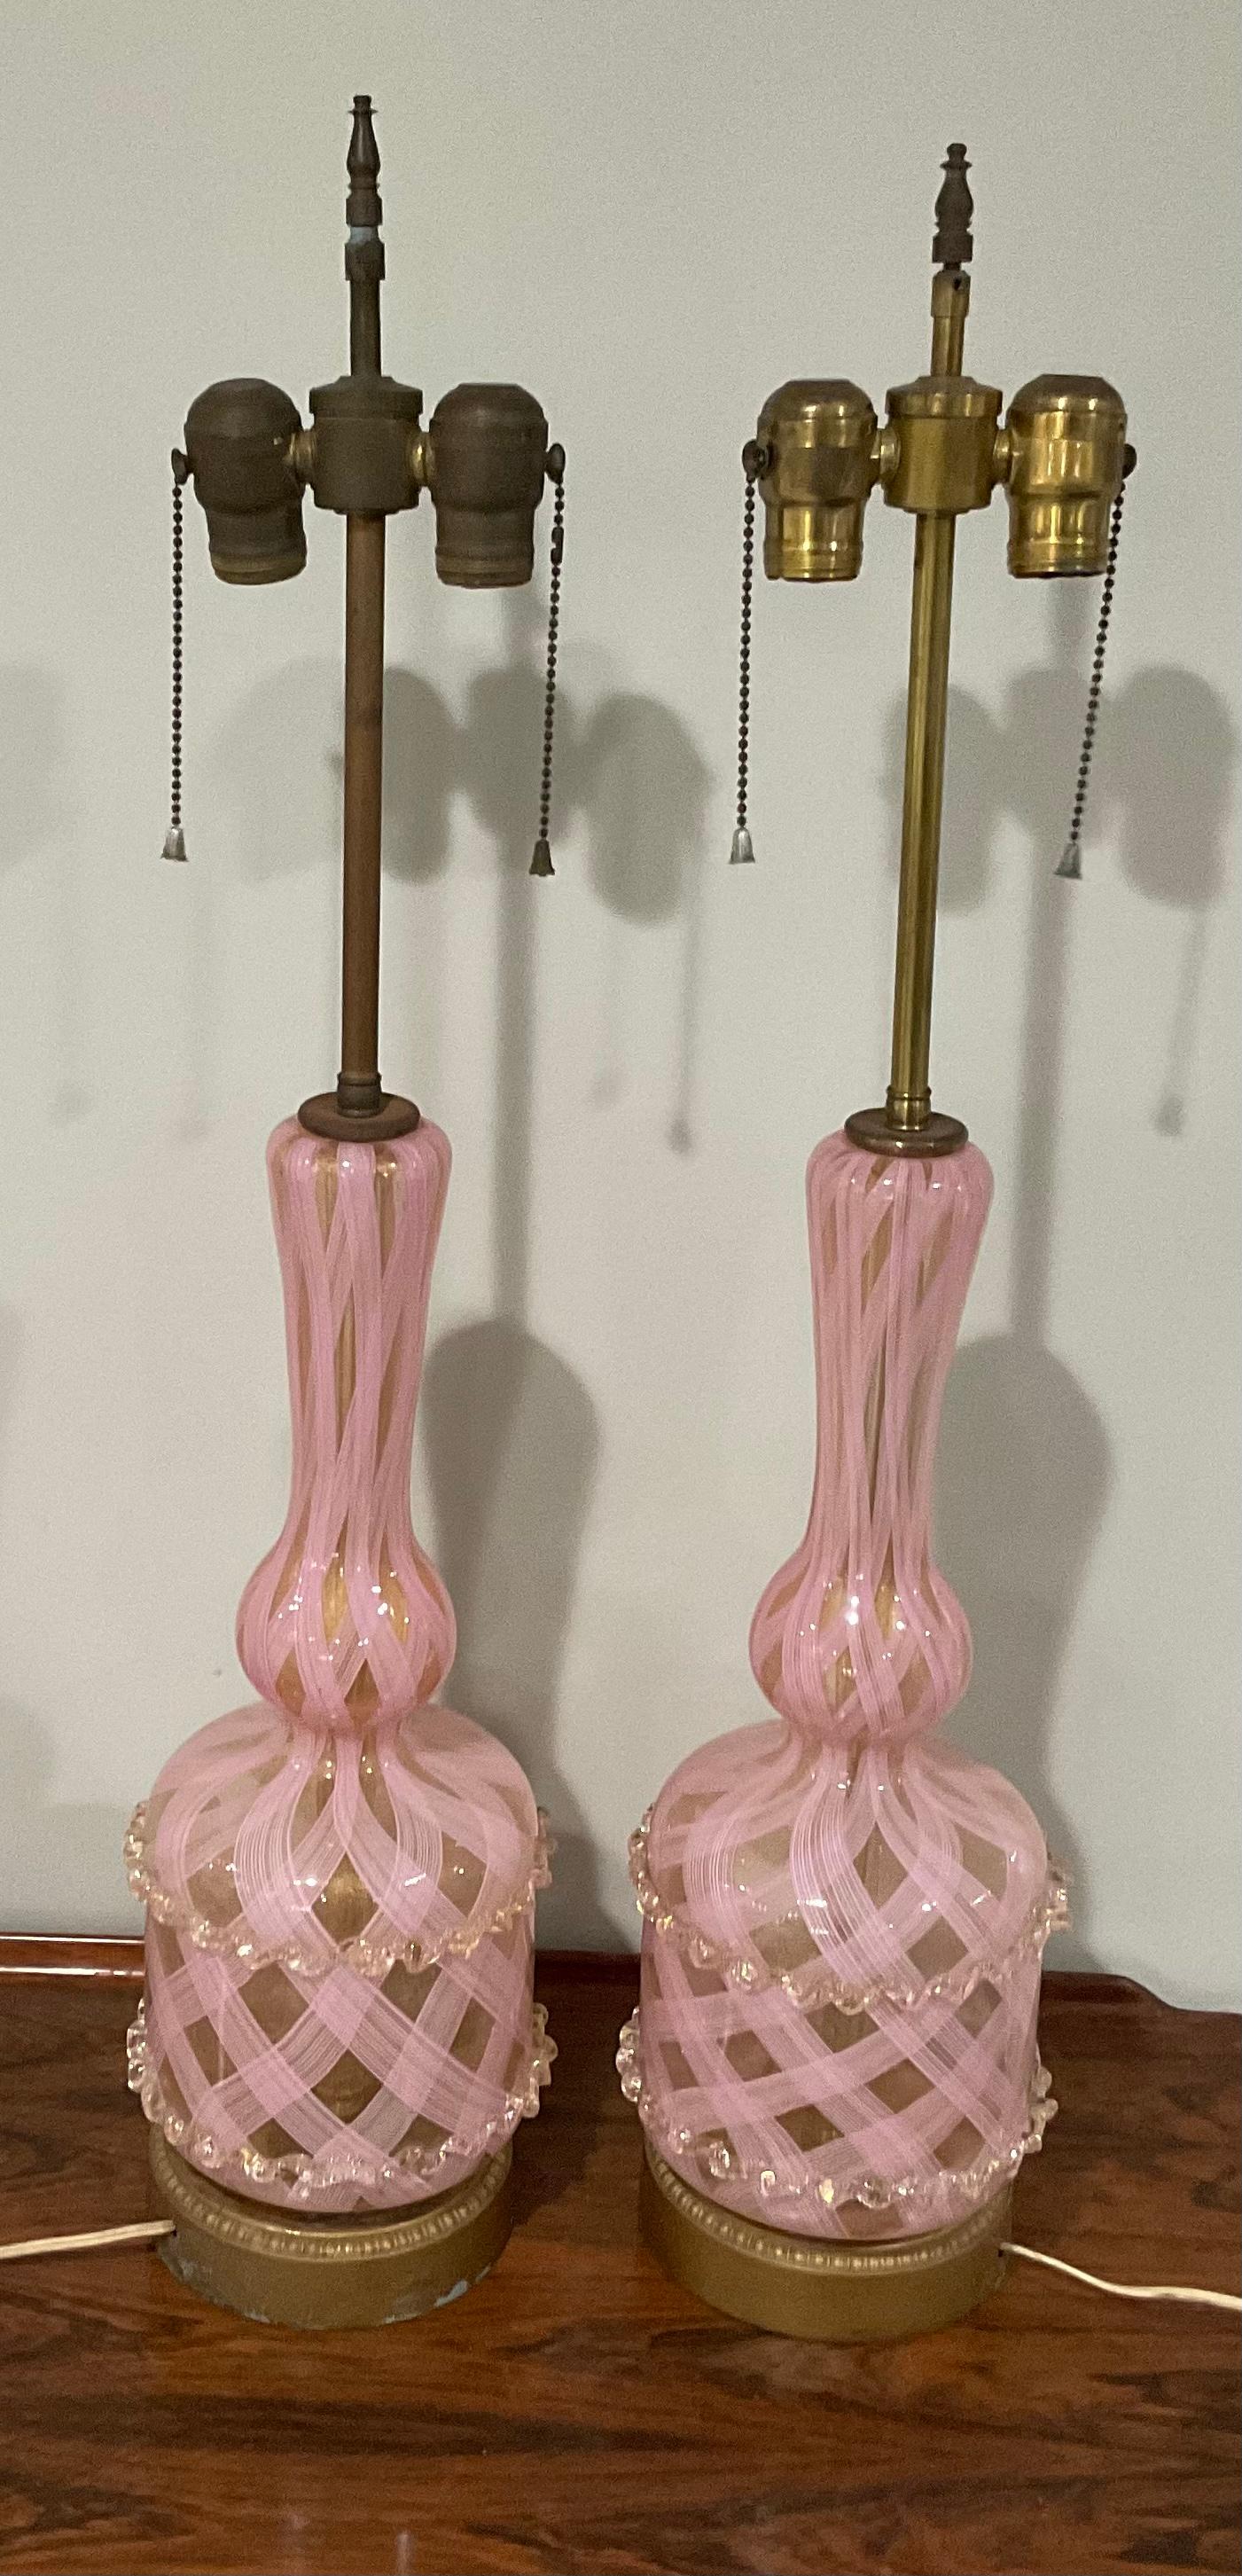 Mid-20th Century Rare Pair Barovier and Toso Murano Pair Lamps in Pink and Gold Ercole Barovier For Sale